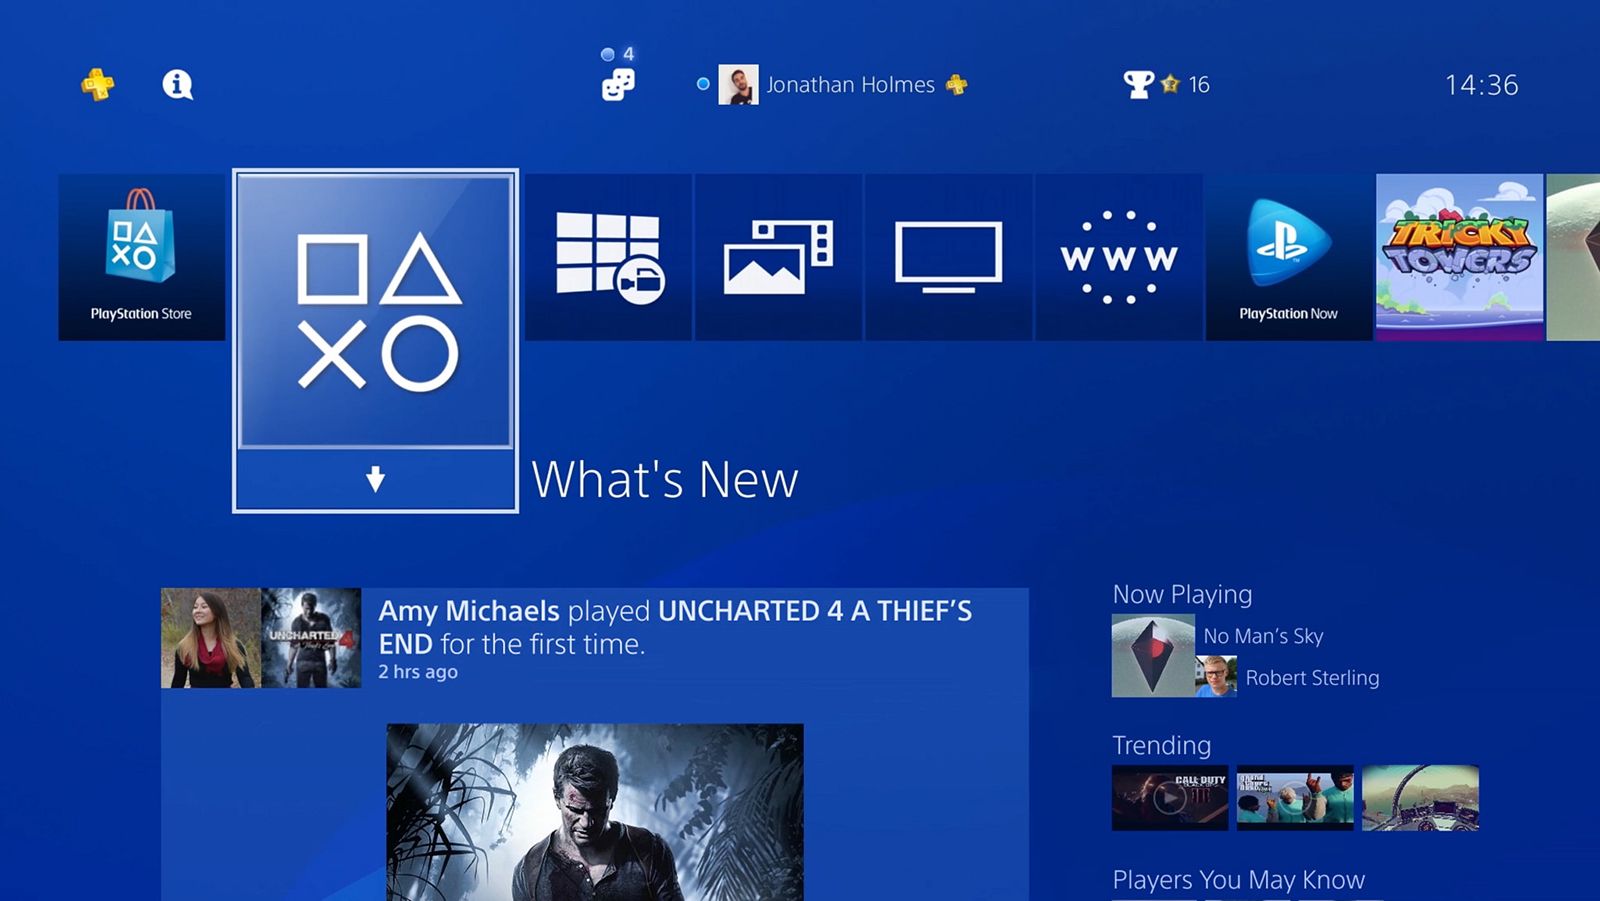 ps4 hdr update arrives download firmware 4 0 right now image 1